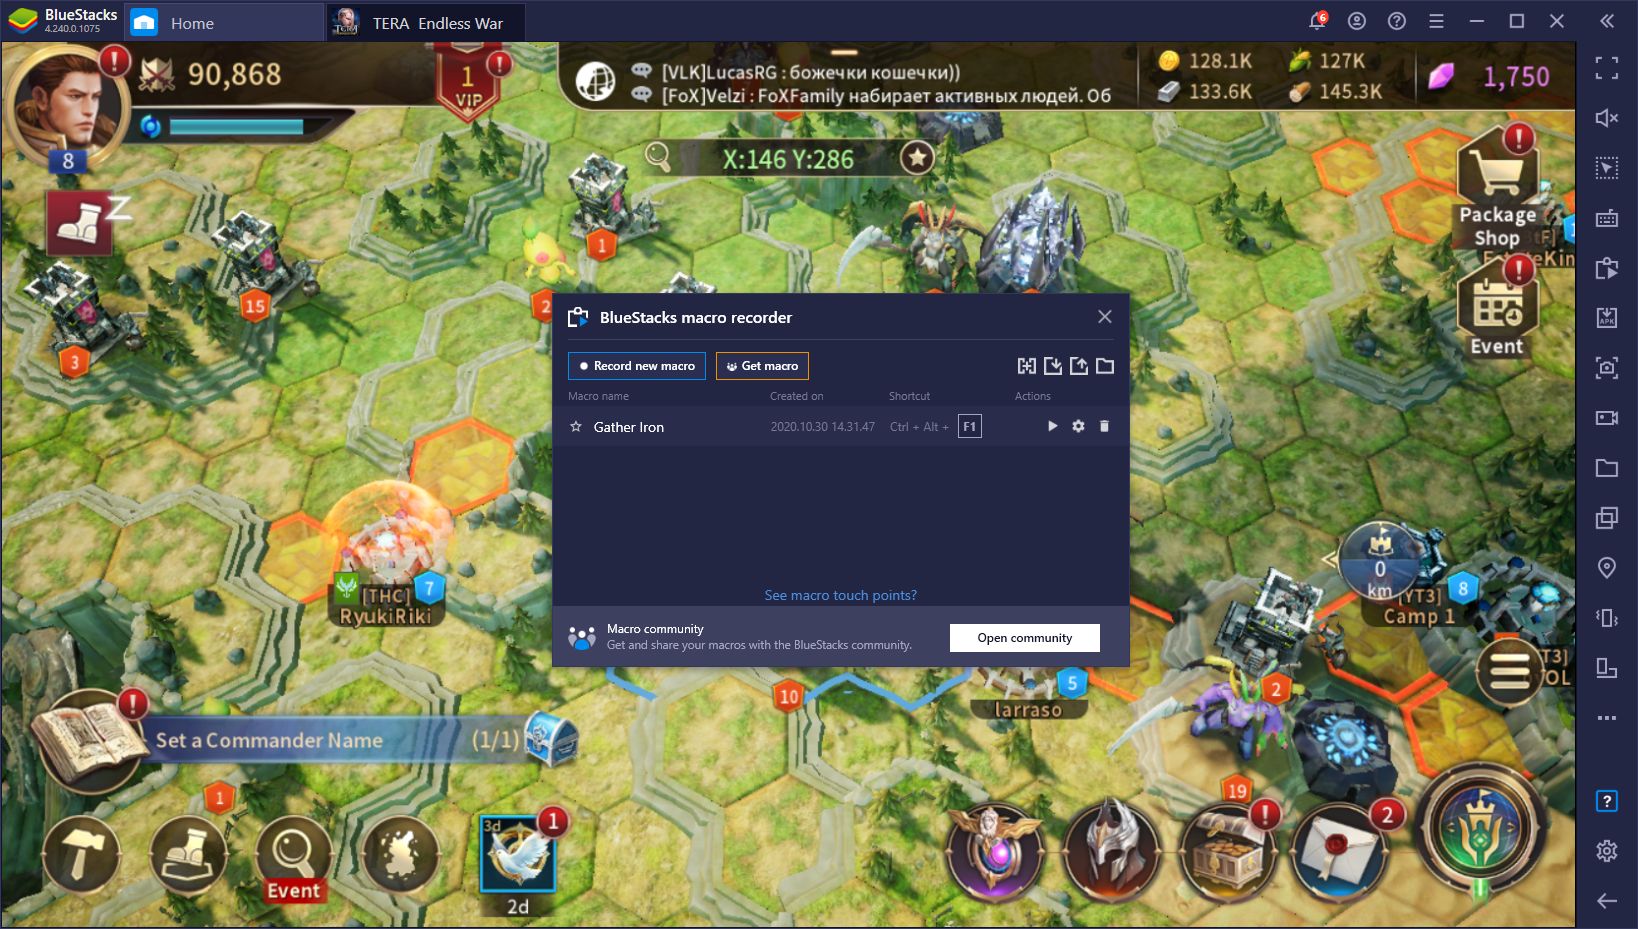 TERA: Endless War on PC - Tips and Tricks for Using BlueStacks to Automate and Improve Your Performance